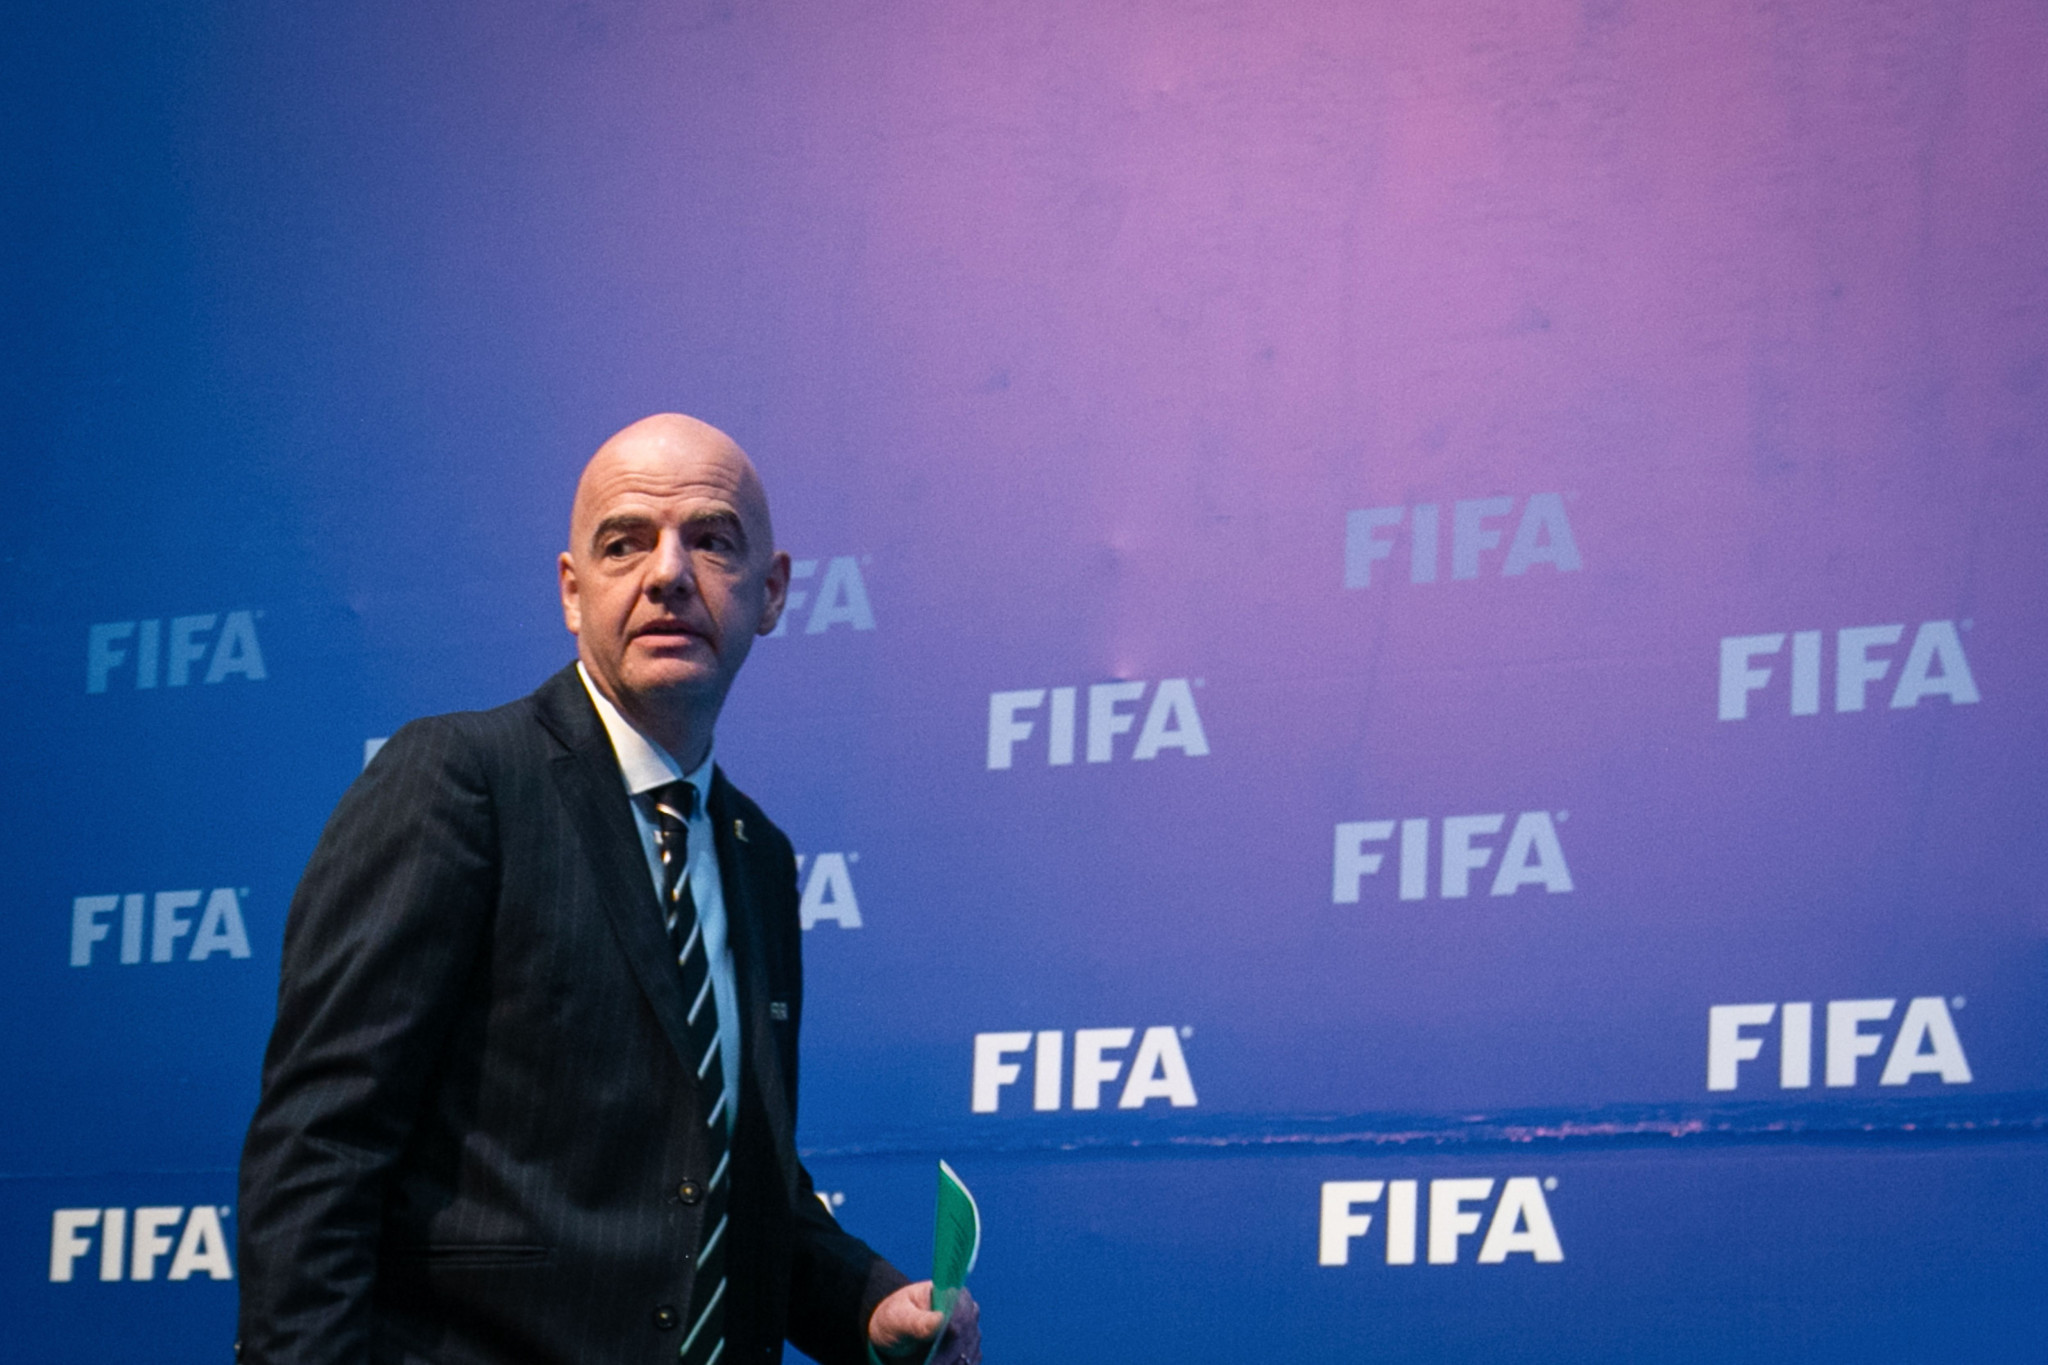 Leaked documents show Infantino influenced changes to ethics code, report claims